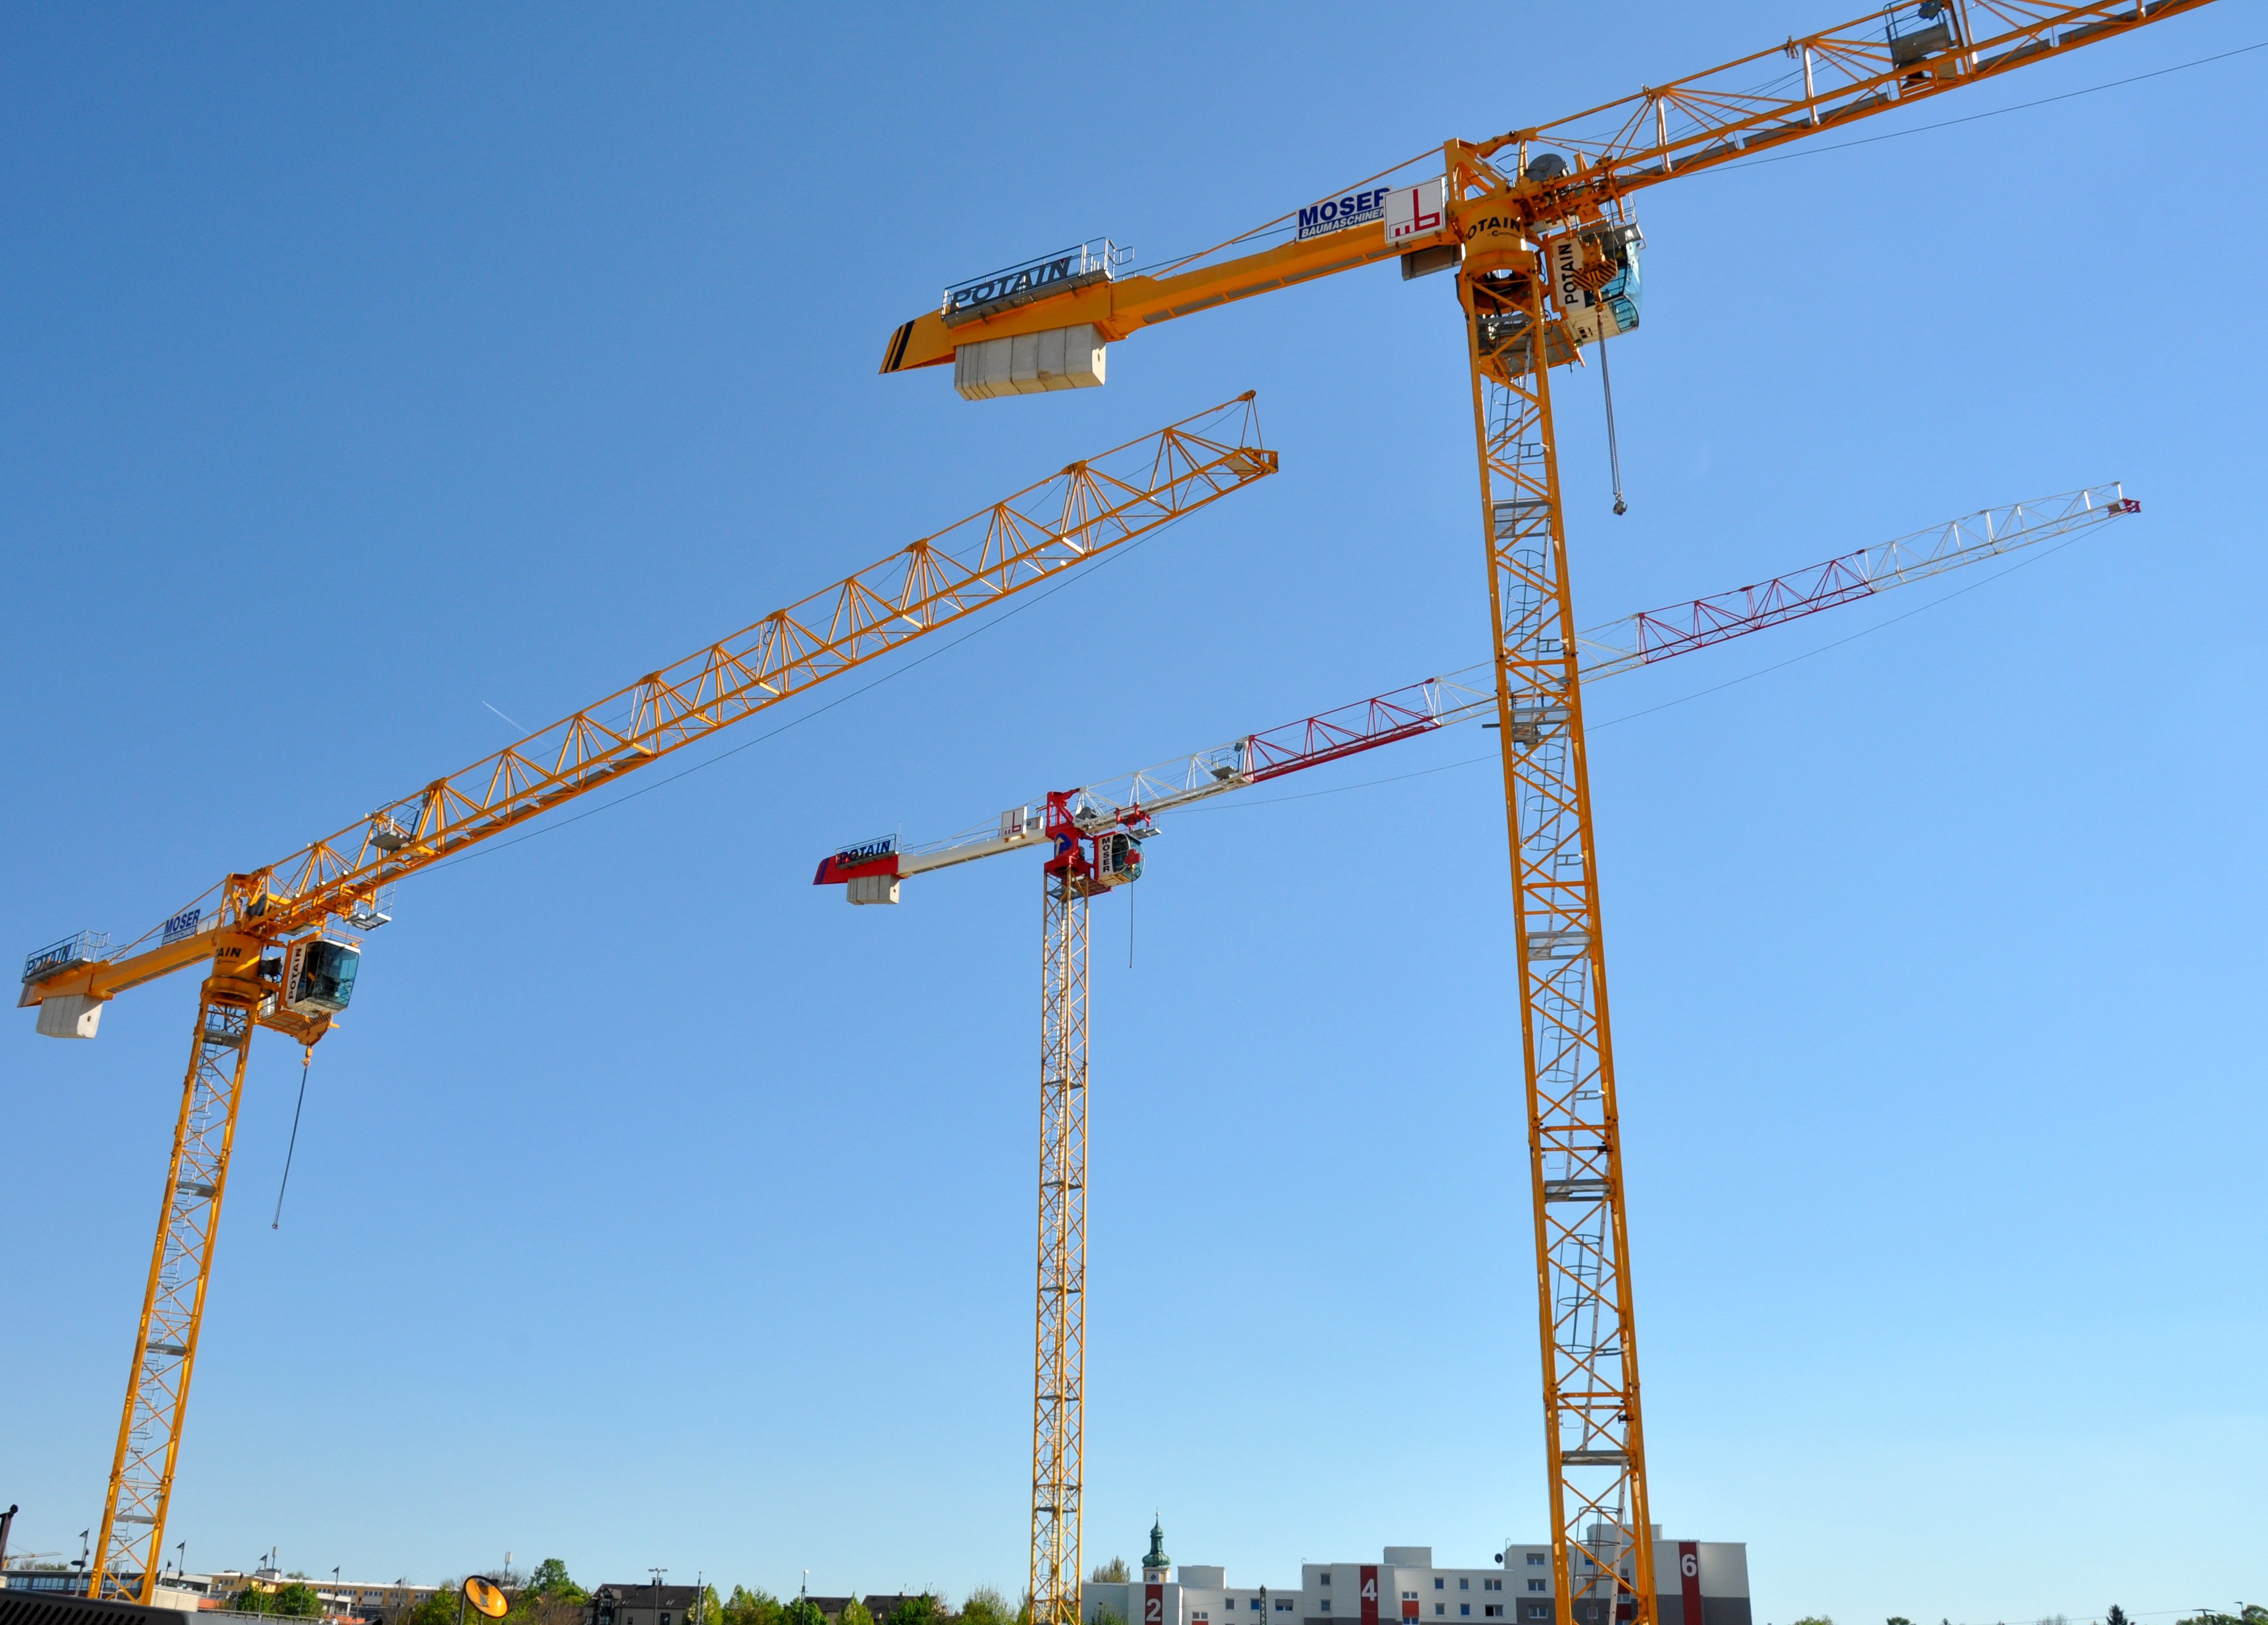 A fleet of 13 Potain tower cranes is helping to build a new residential and commercial district in Regensburg, Germany. The new district, named “Das DÖRNBERG,” is only miles from Regenburg’s historic old town, which has been a UNESCO World Cultural Heritage since 2006.